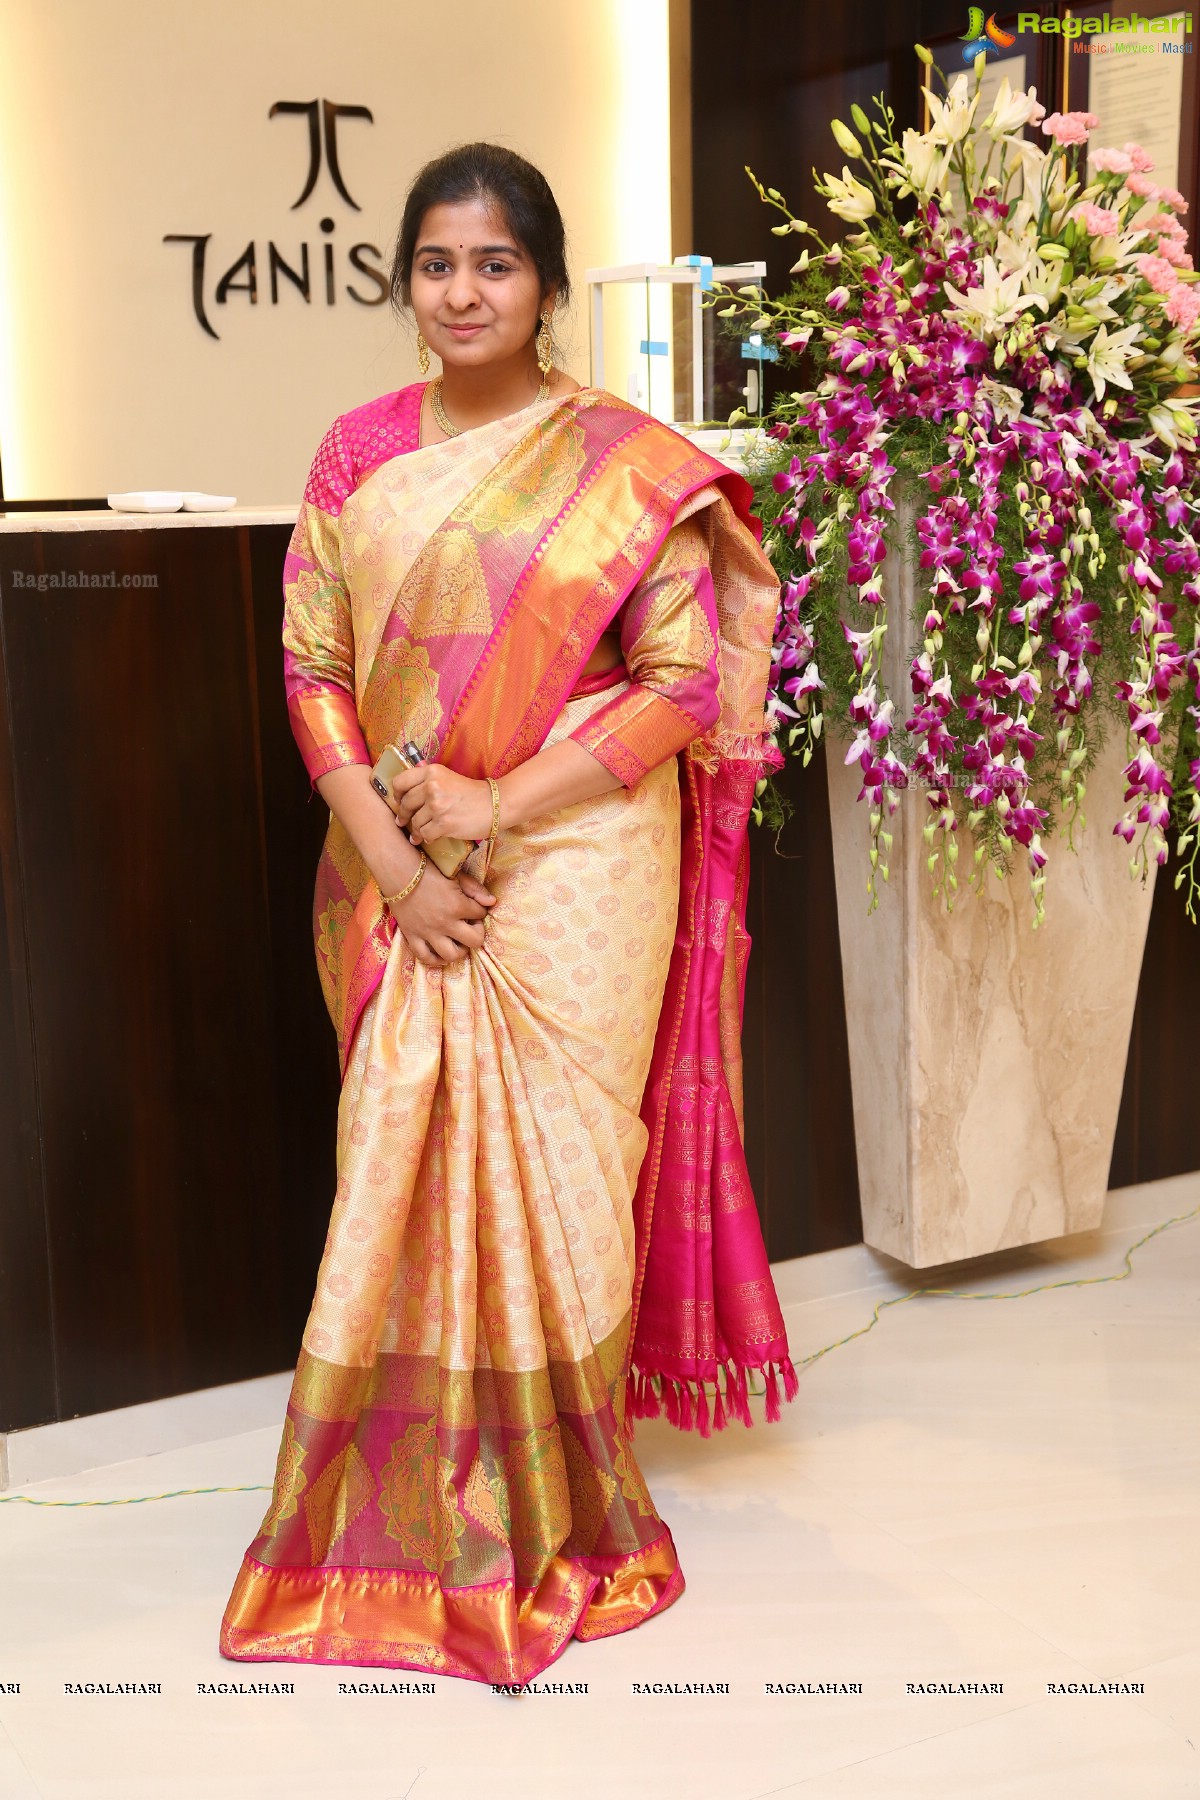 Tanishq, India’s Most Trusted Jeweller Opens Its New Showroom at Kompally